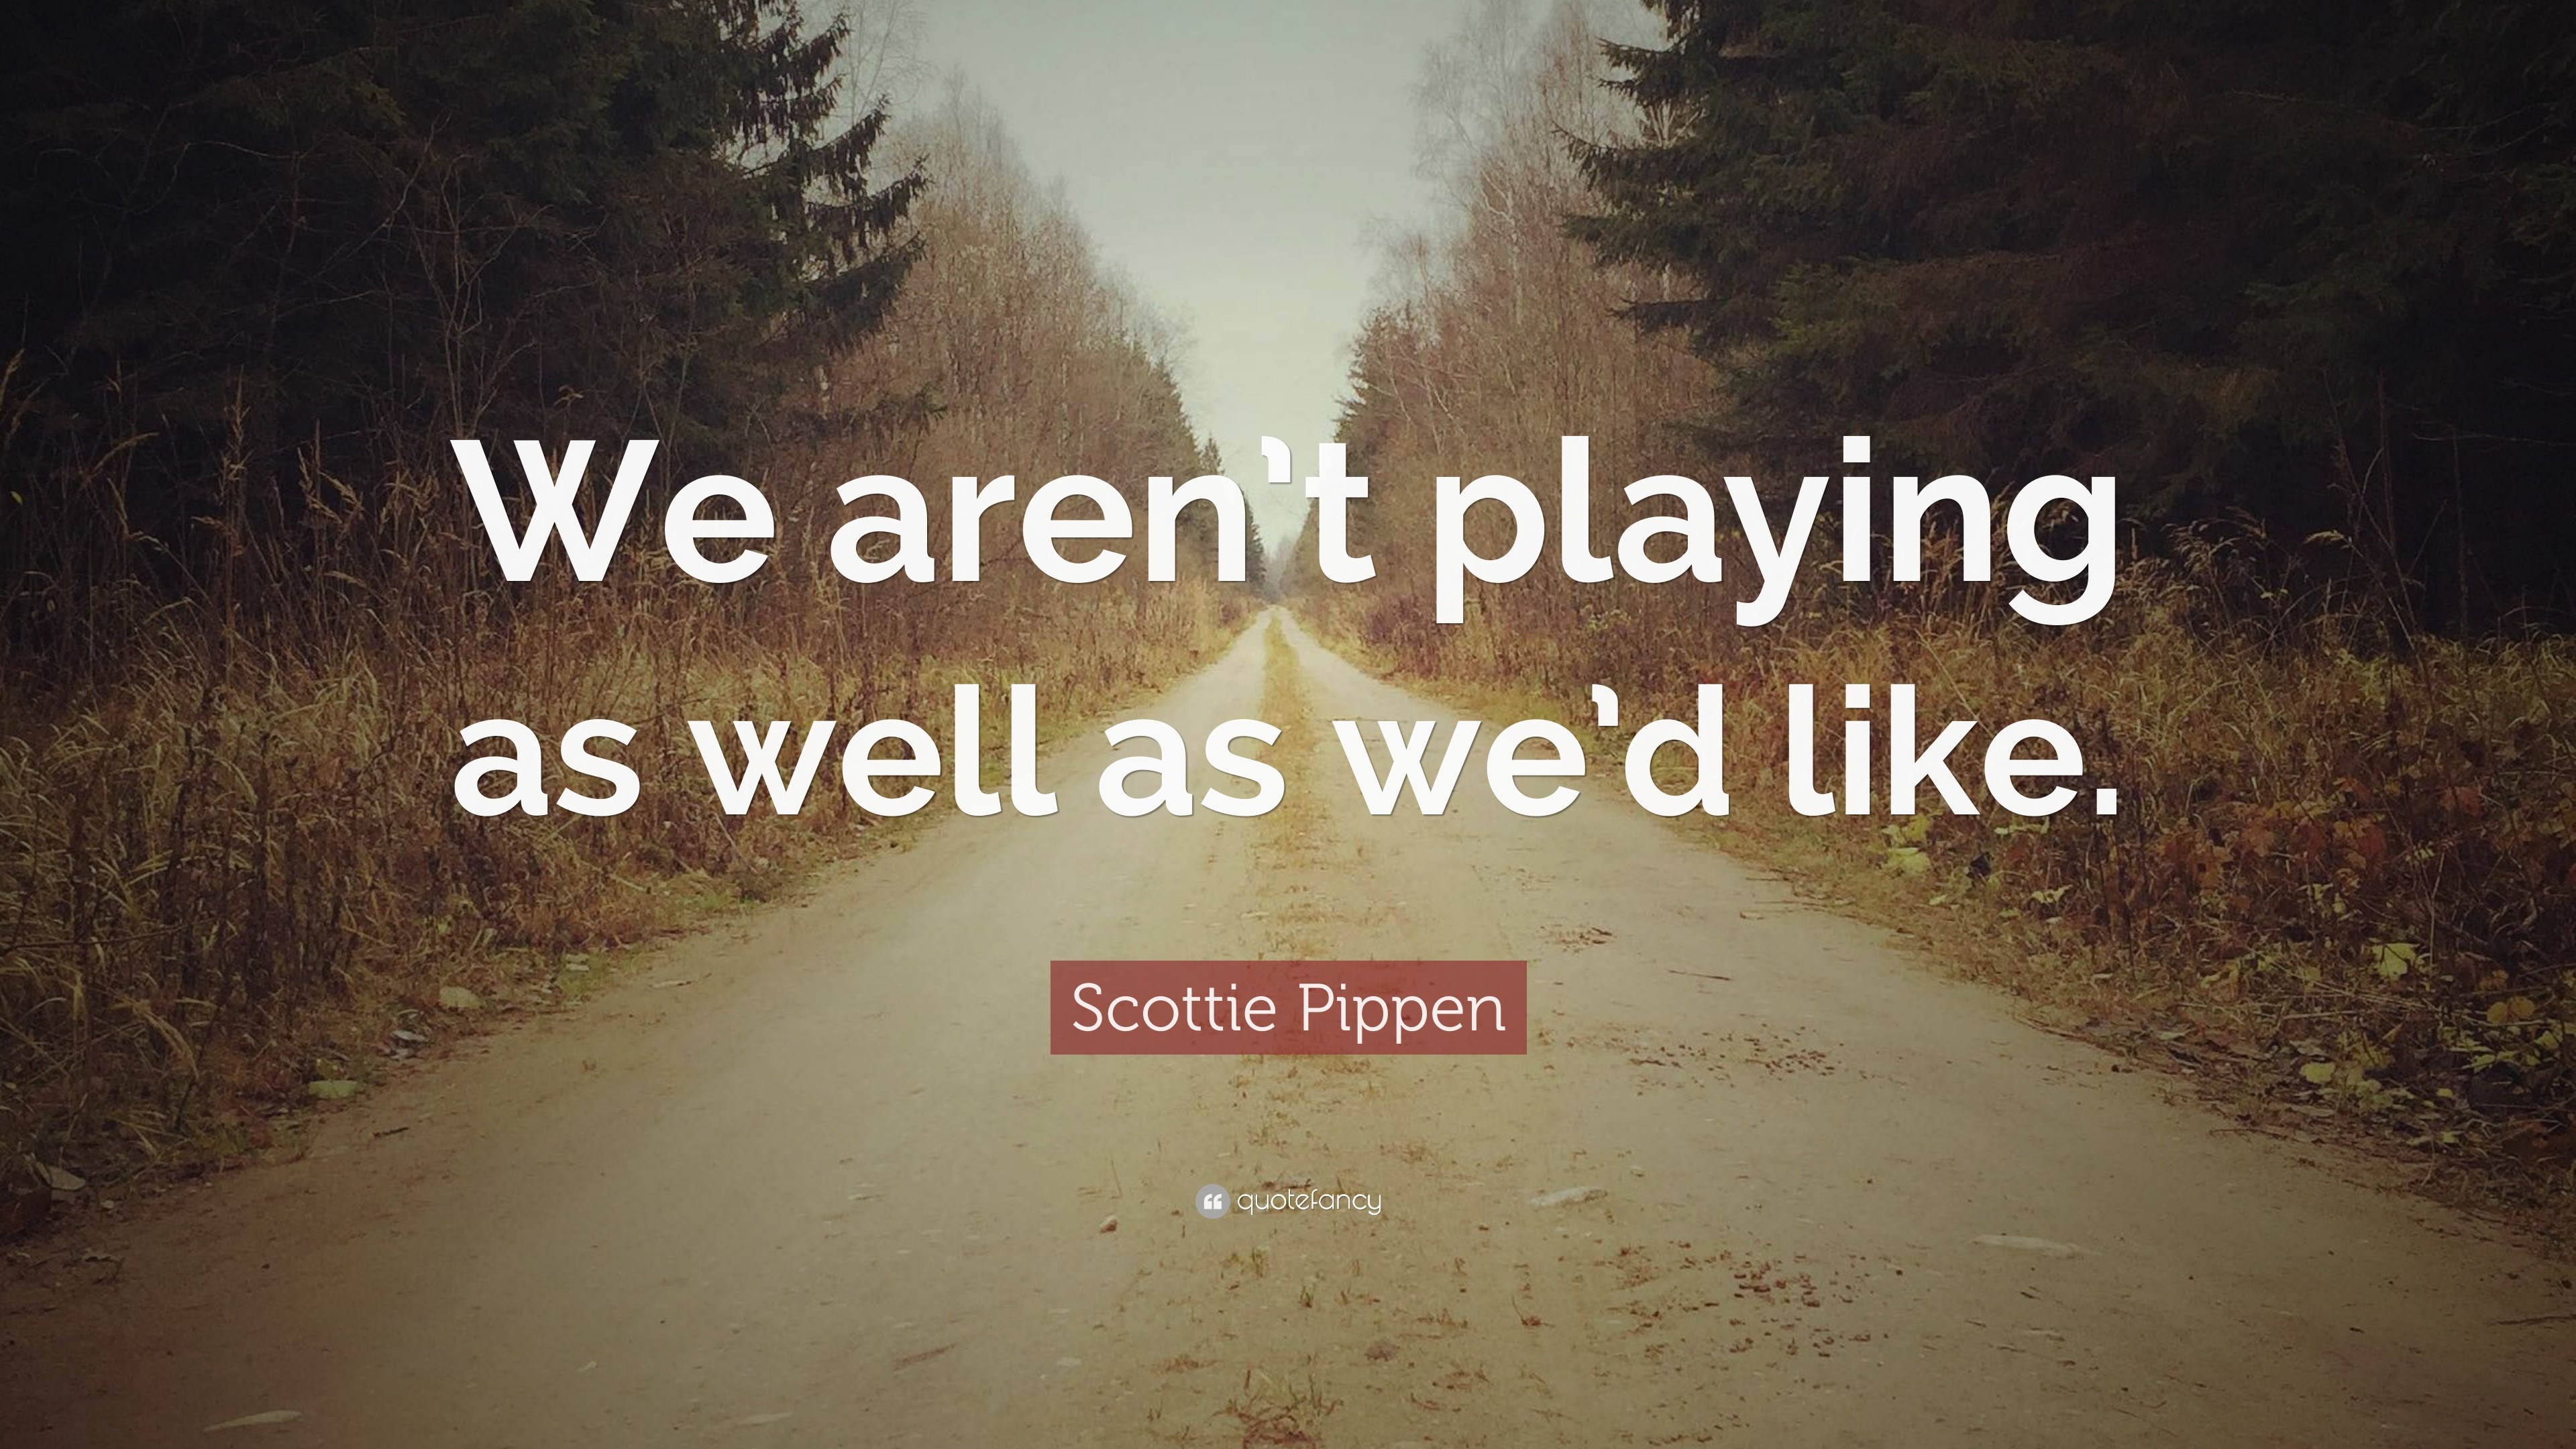 3840x2160 Scottie Pippen Quote: “We aren't playing as well as we'd